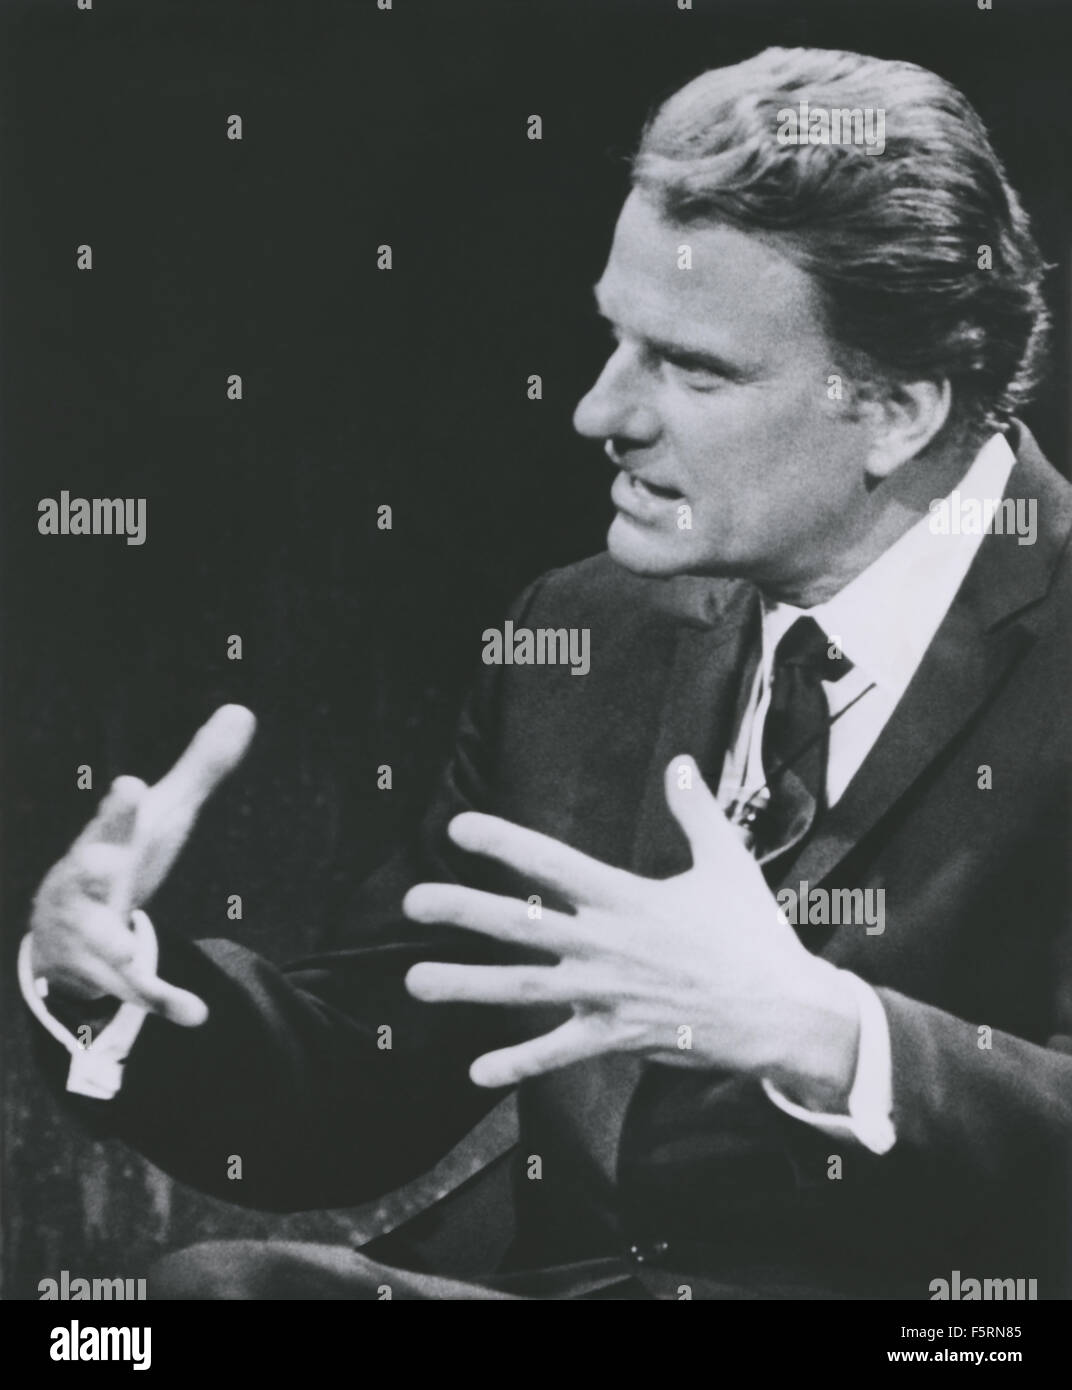 Billy Graham, international Christian evangelist, speaking on ABC-TV's 'Issues and Answers' program on August 24, 1969 where Graham addressed various topics including information he had received from personal sources that several militant revolutionary groups were planning terrorist activity in the United States in the fall of that year. Stock Photo